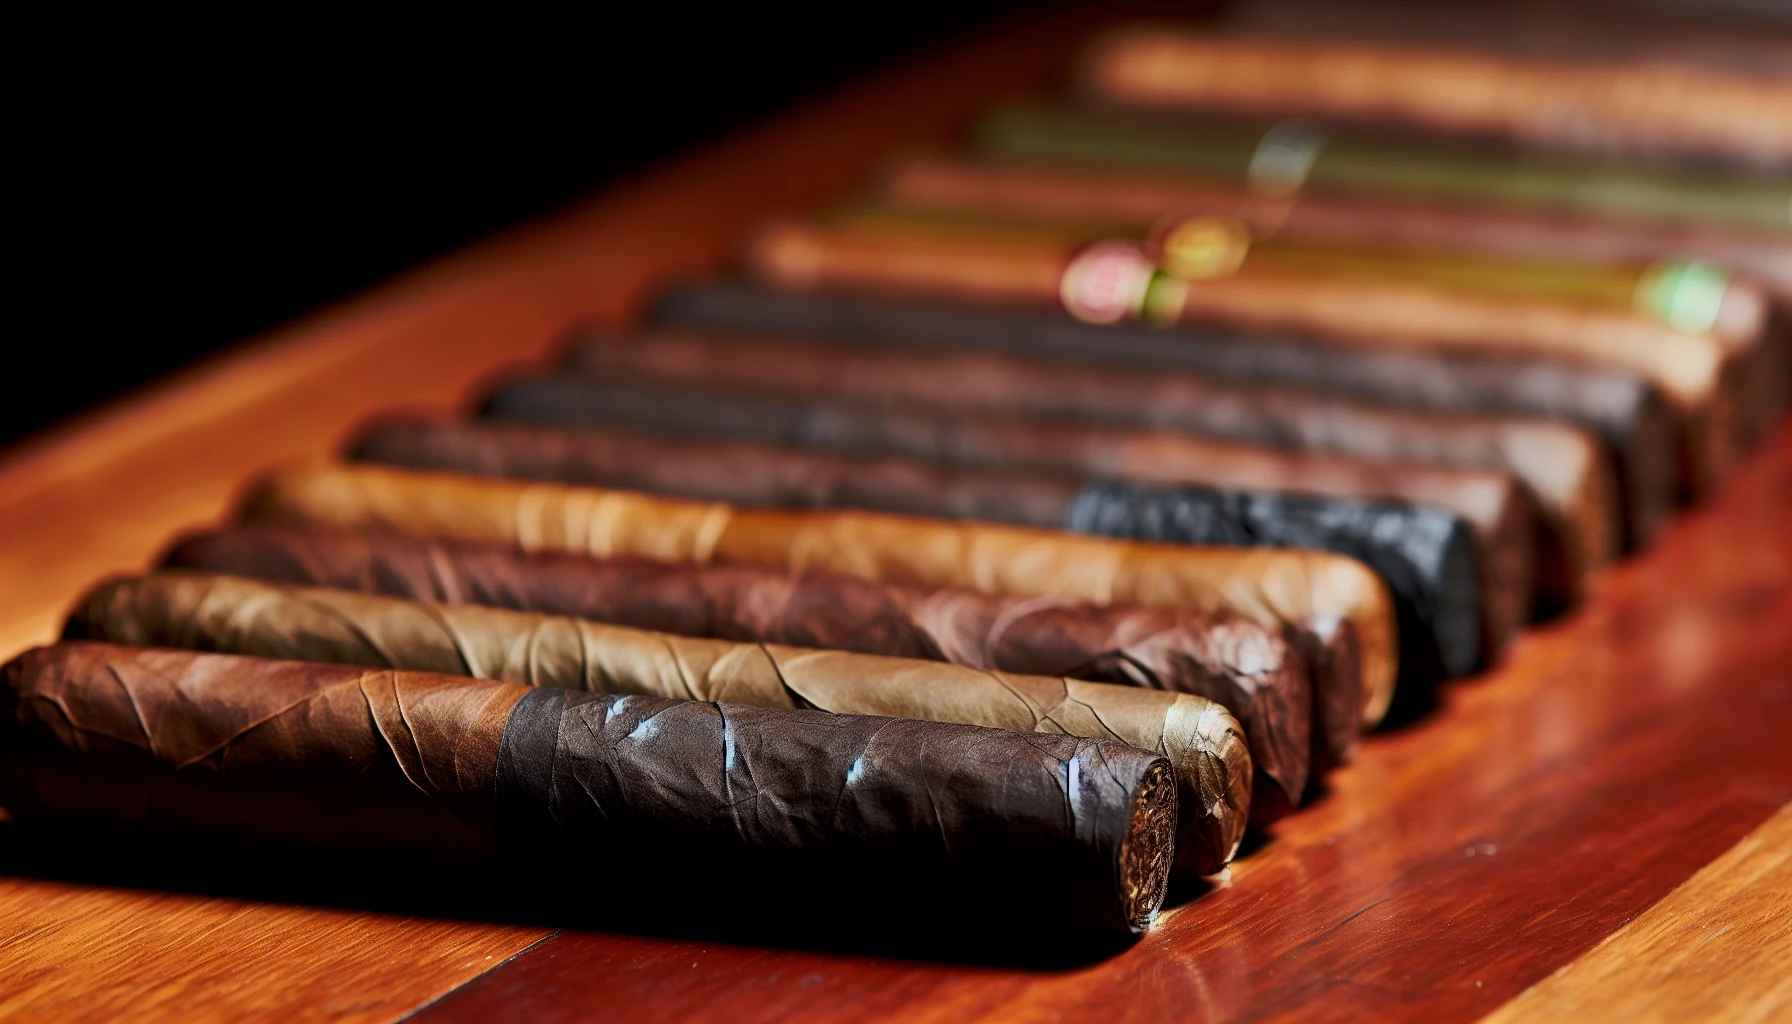 A selection of Maduro cigar wrappers in various shades and textures, illustrating the importance of Maduro wrappers and their impact on flavor